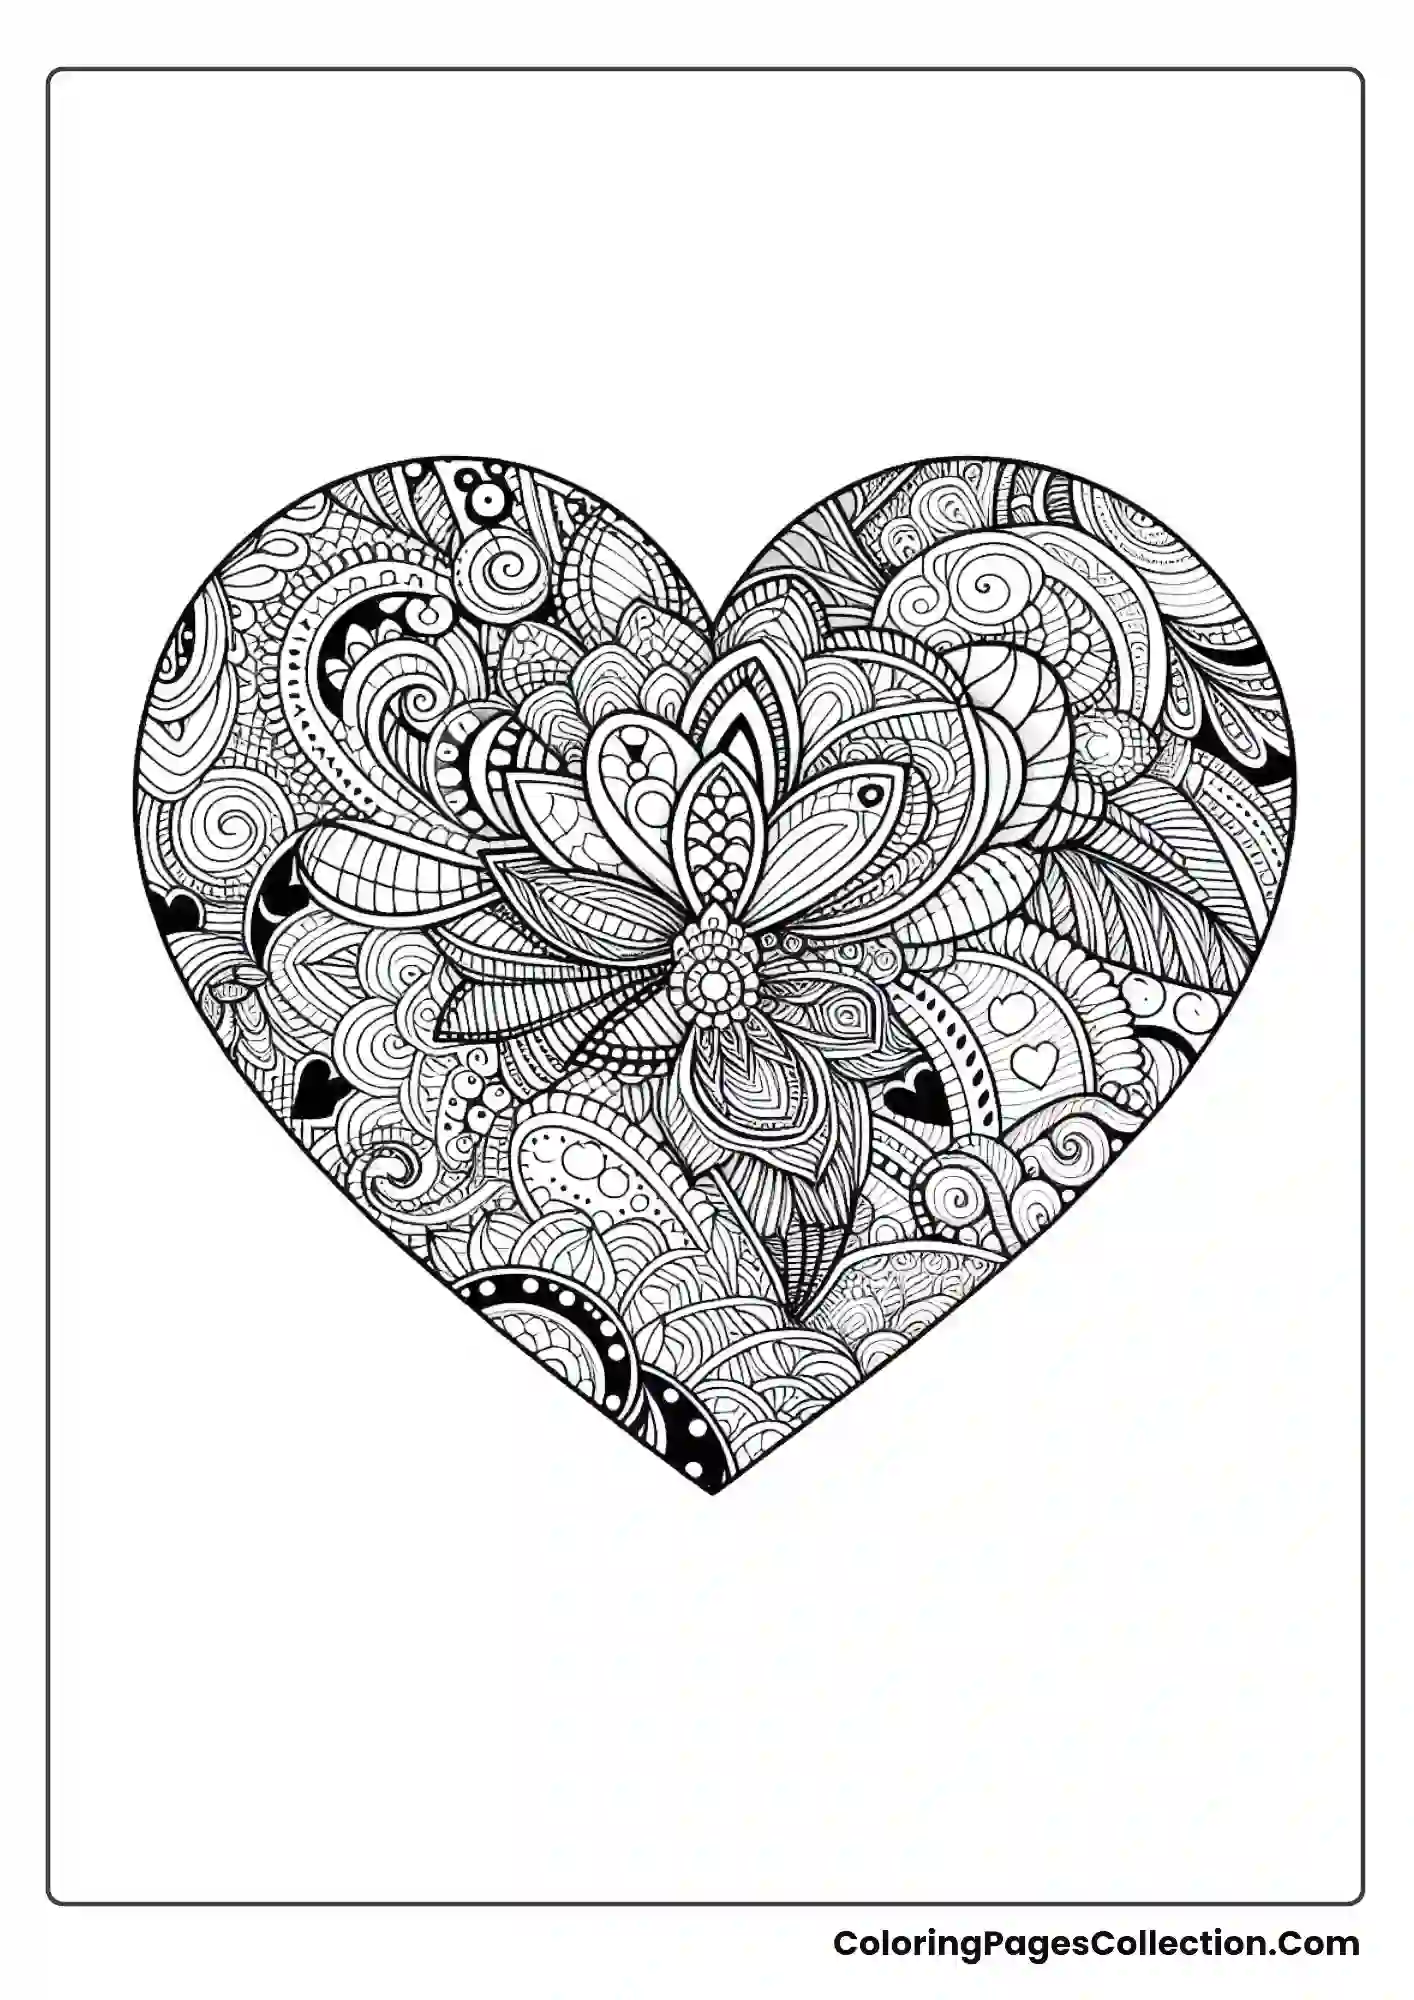 A Heart Filled With Various Zentangle Patterns